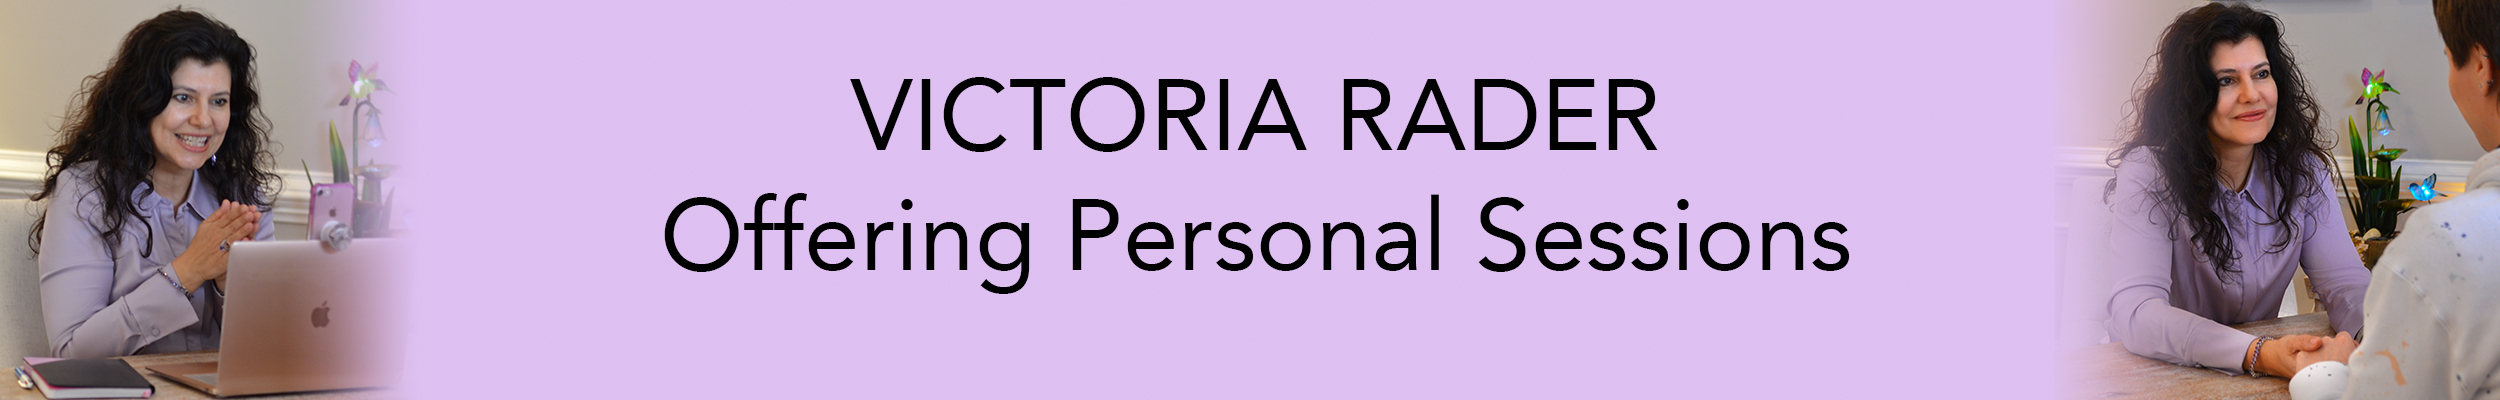 Personal sessions with Victoria Rader